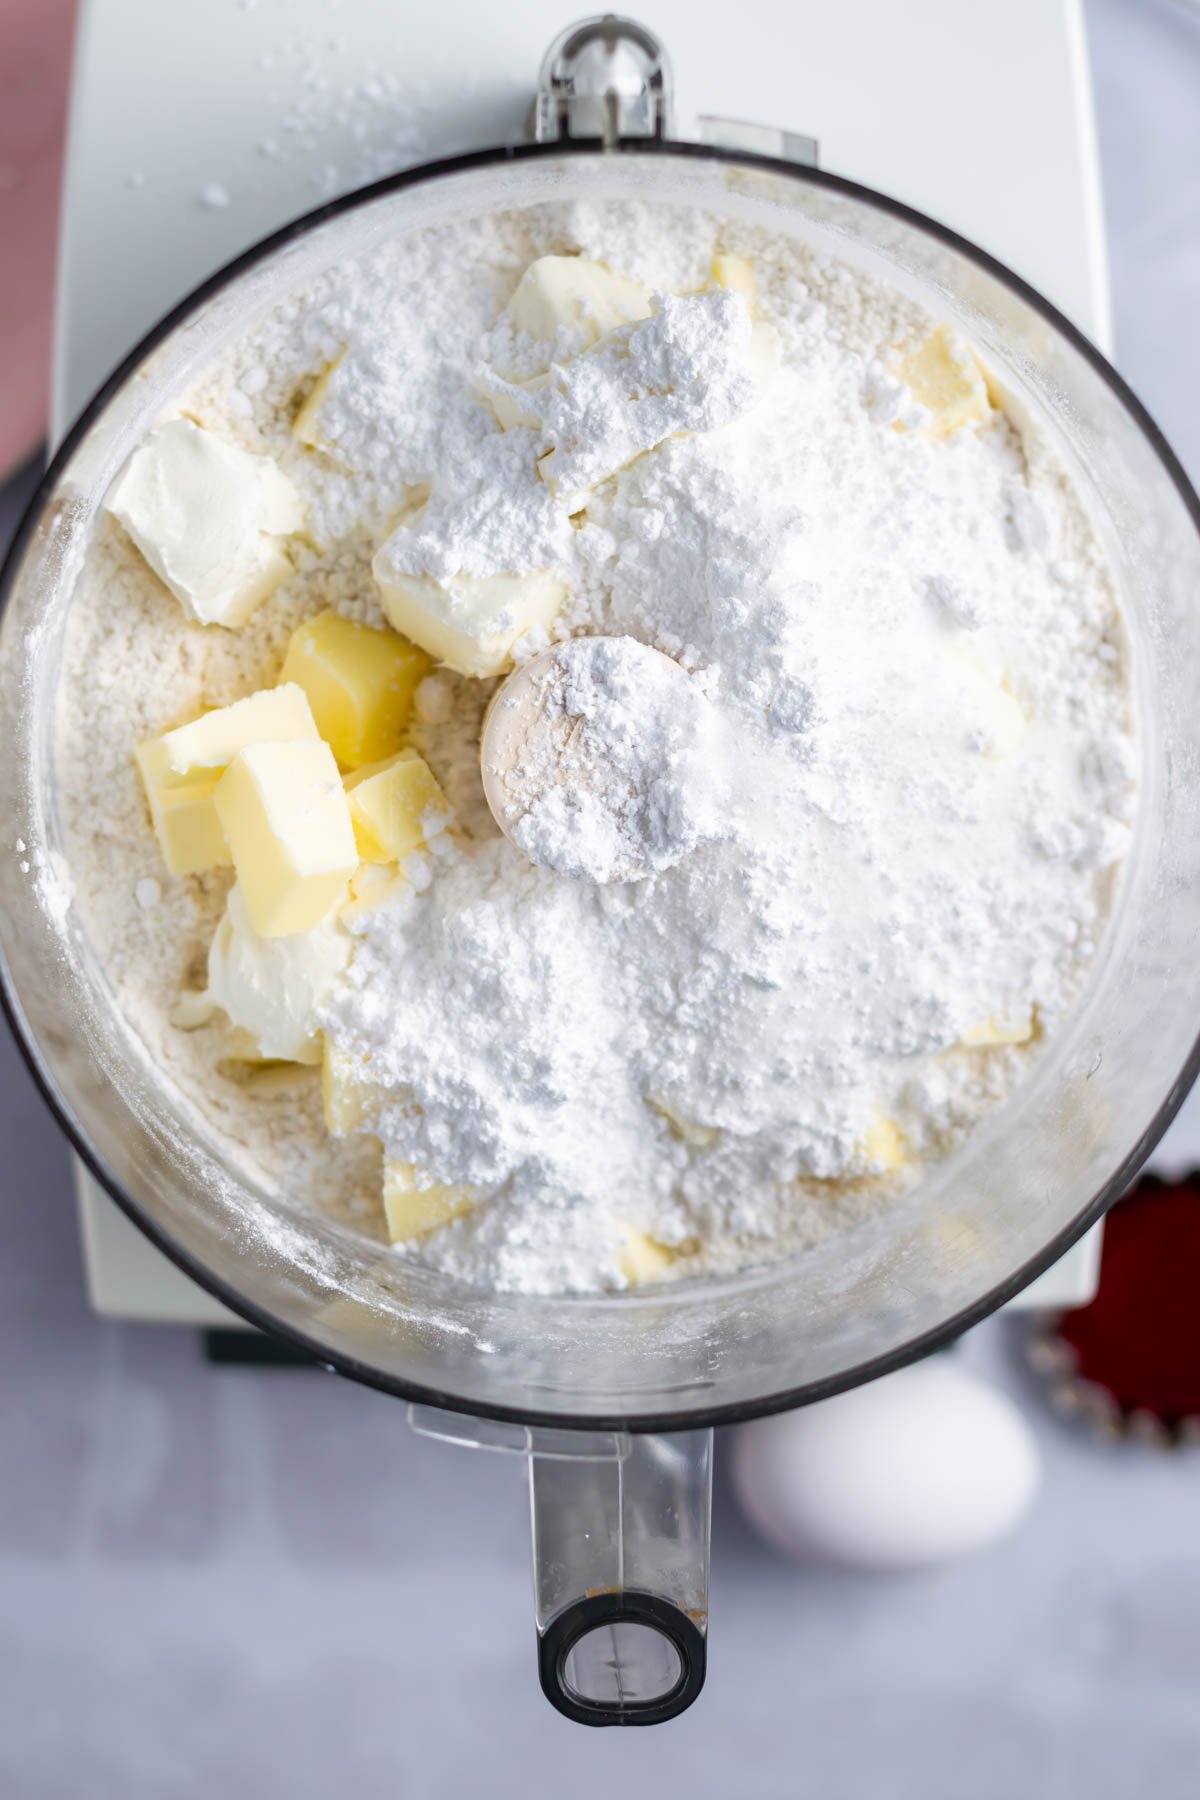 flour, butter, cream cheese and sugars in the bowl of a food processor.